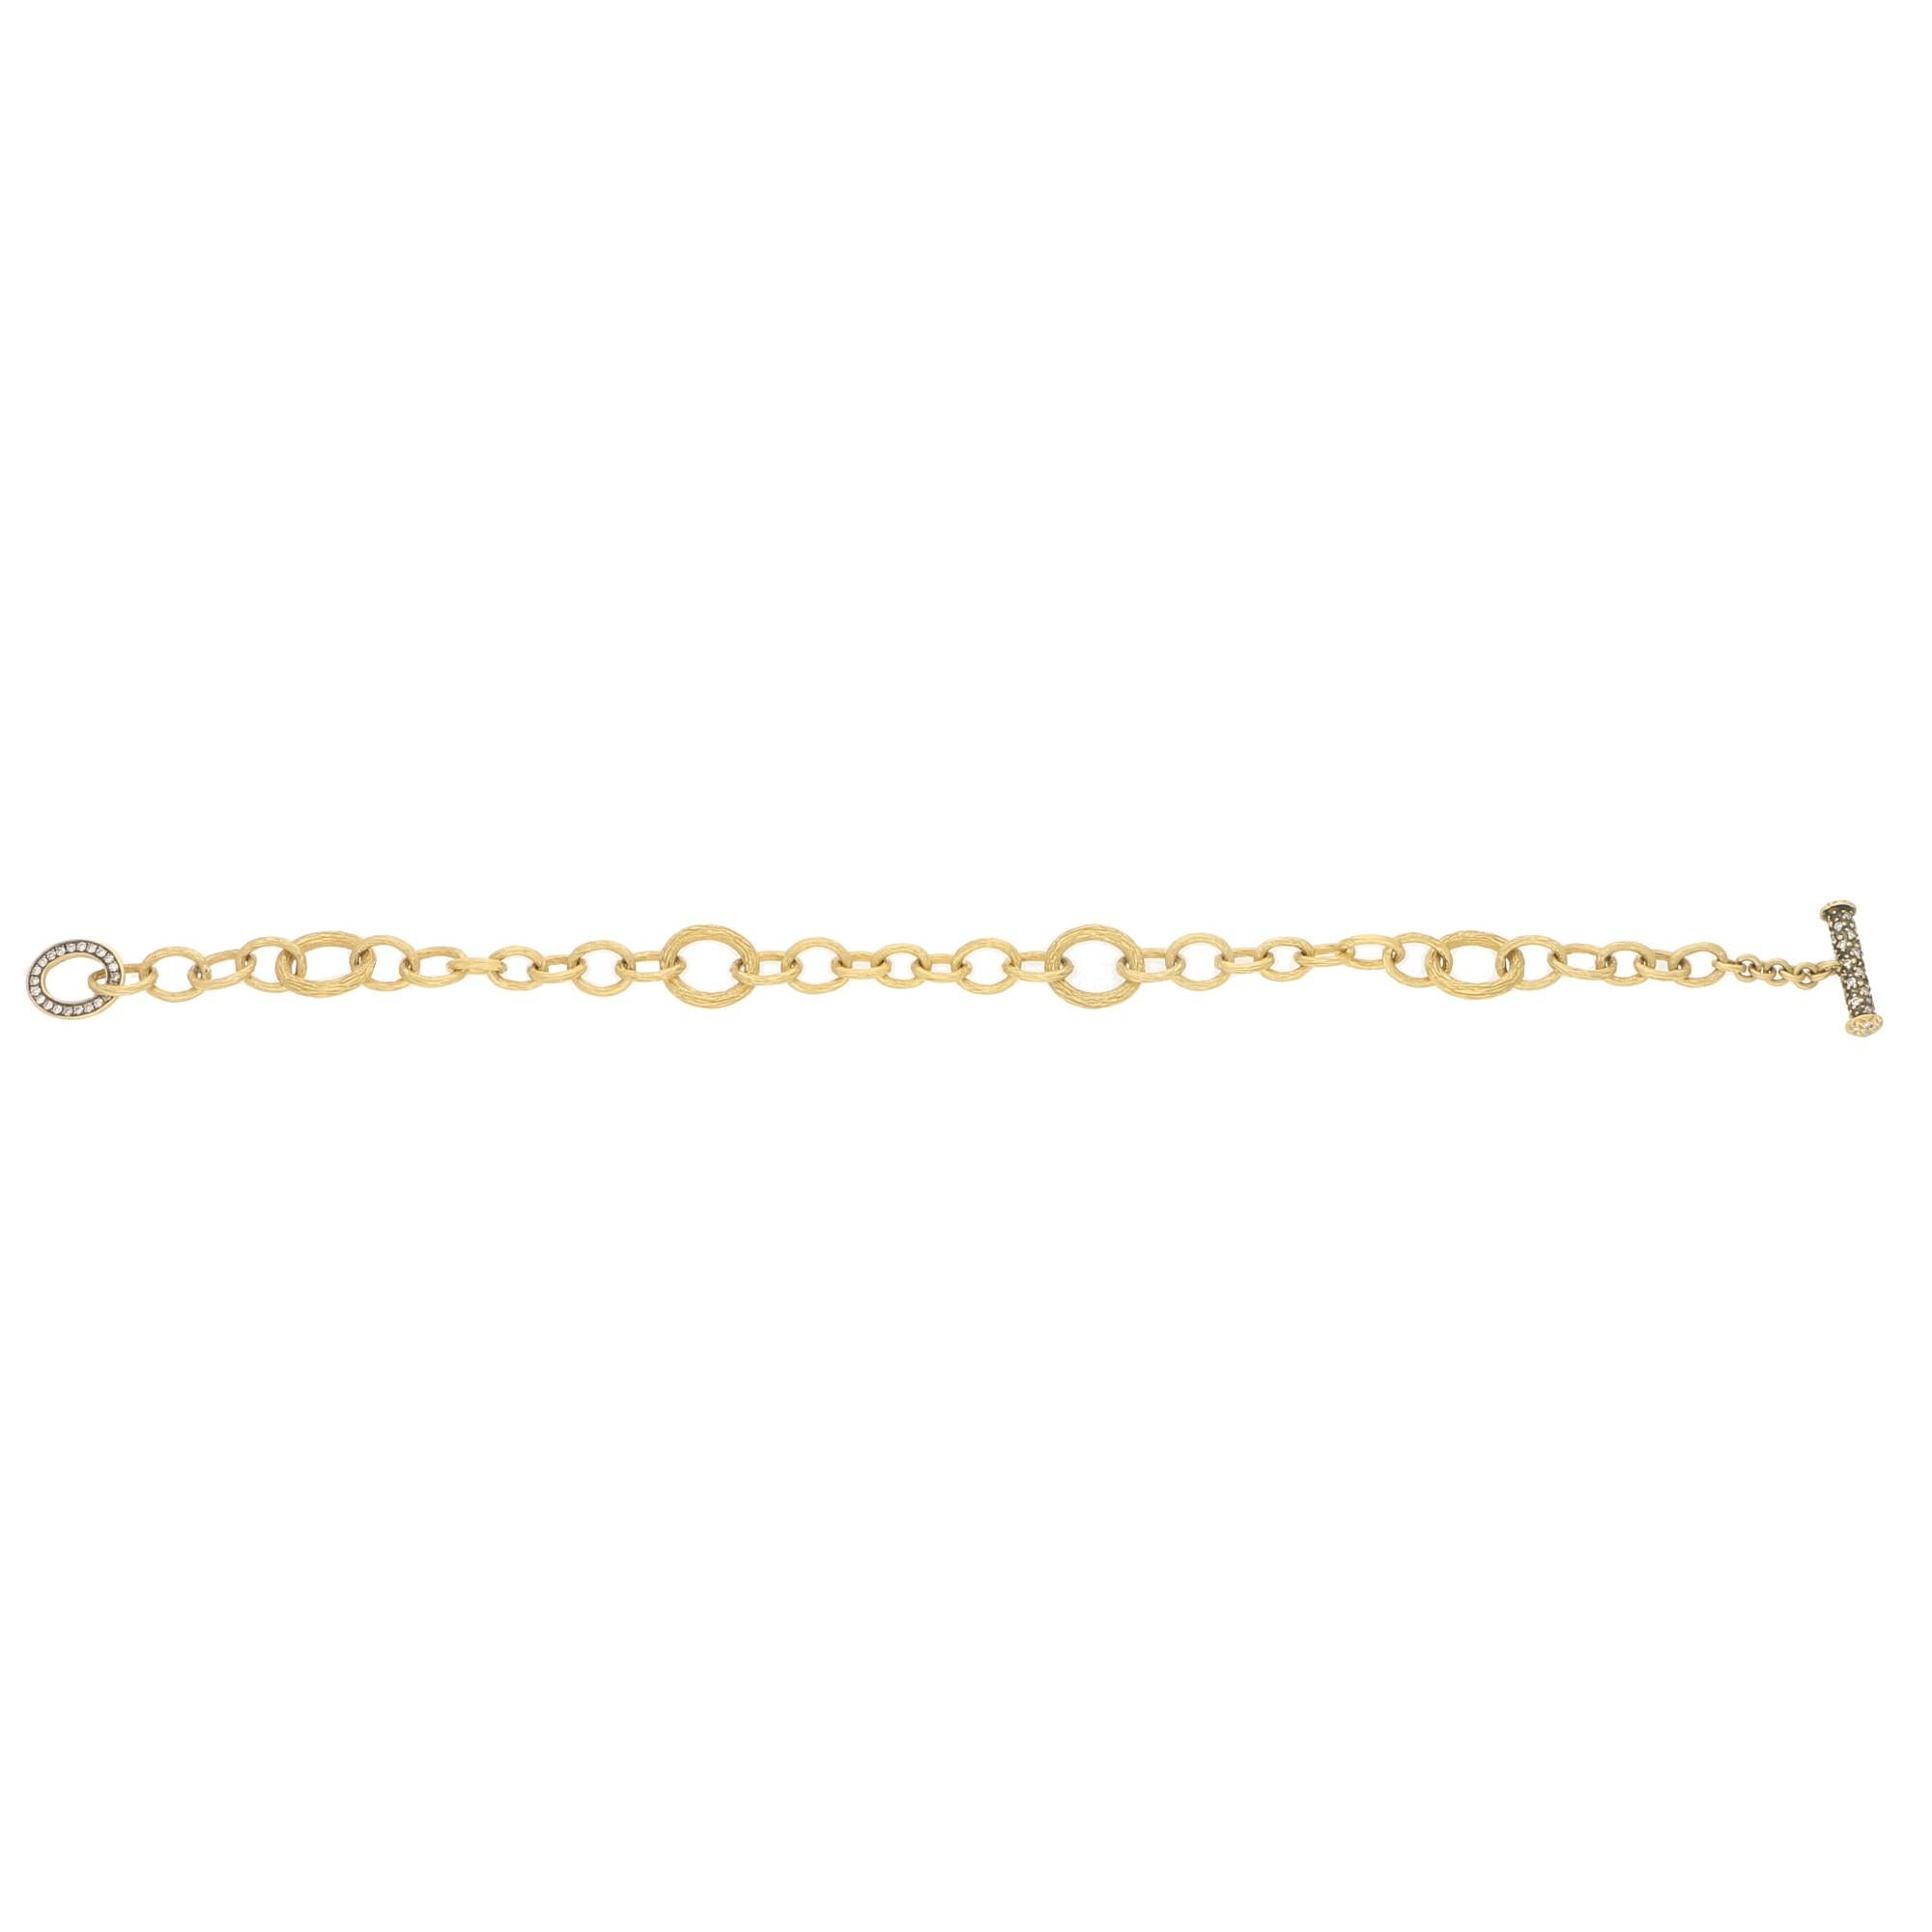 A modern take on the traditional charm link bracelet. A signed Annoushka bracelet set in 18 carat yellow gold. The bracelet is composed of 34 graduating brushed gold hoops with a simple yet beautiful diamond set clasp.

The bracelet measures exactly